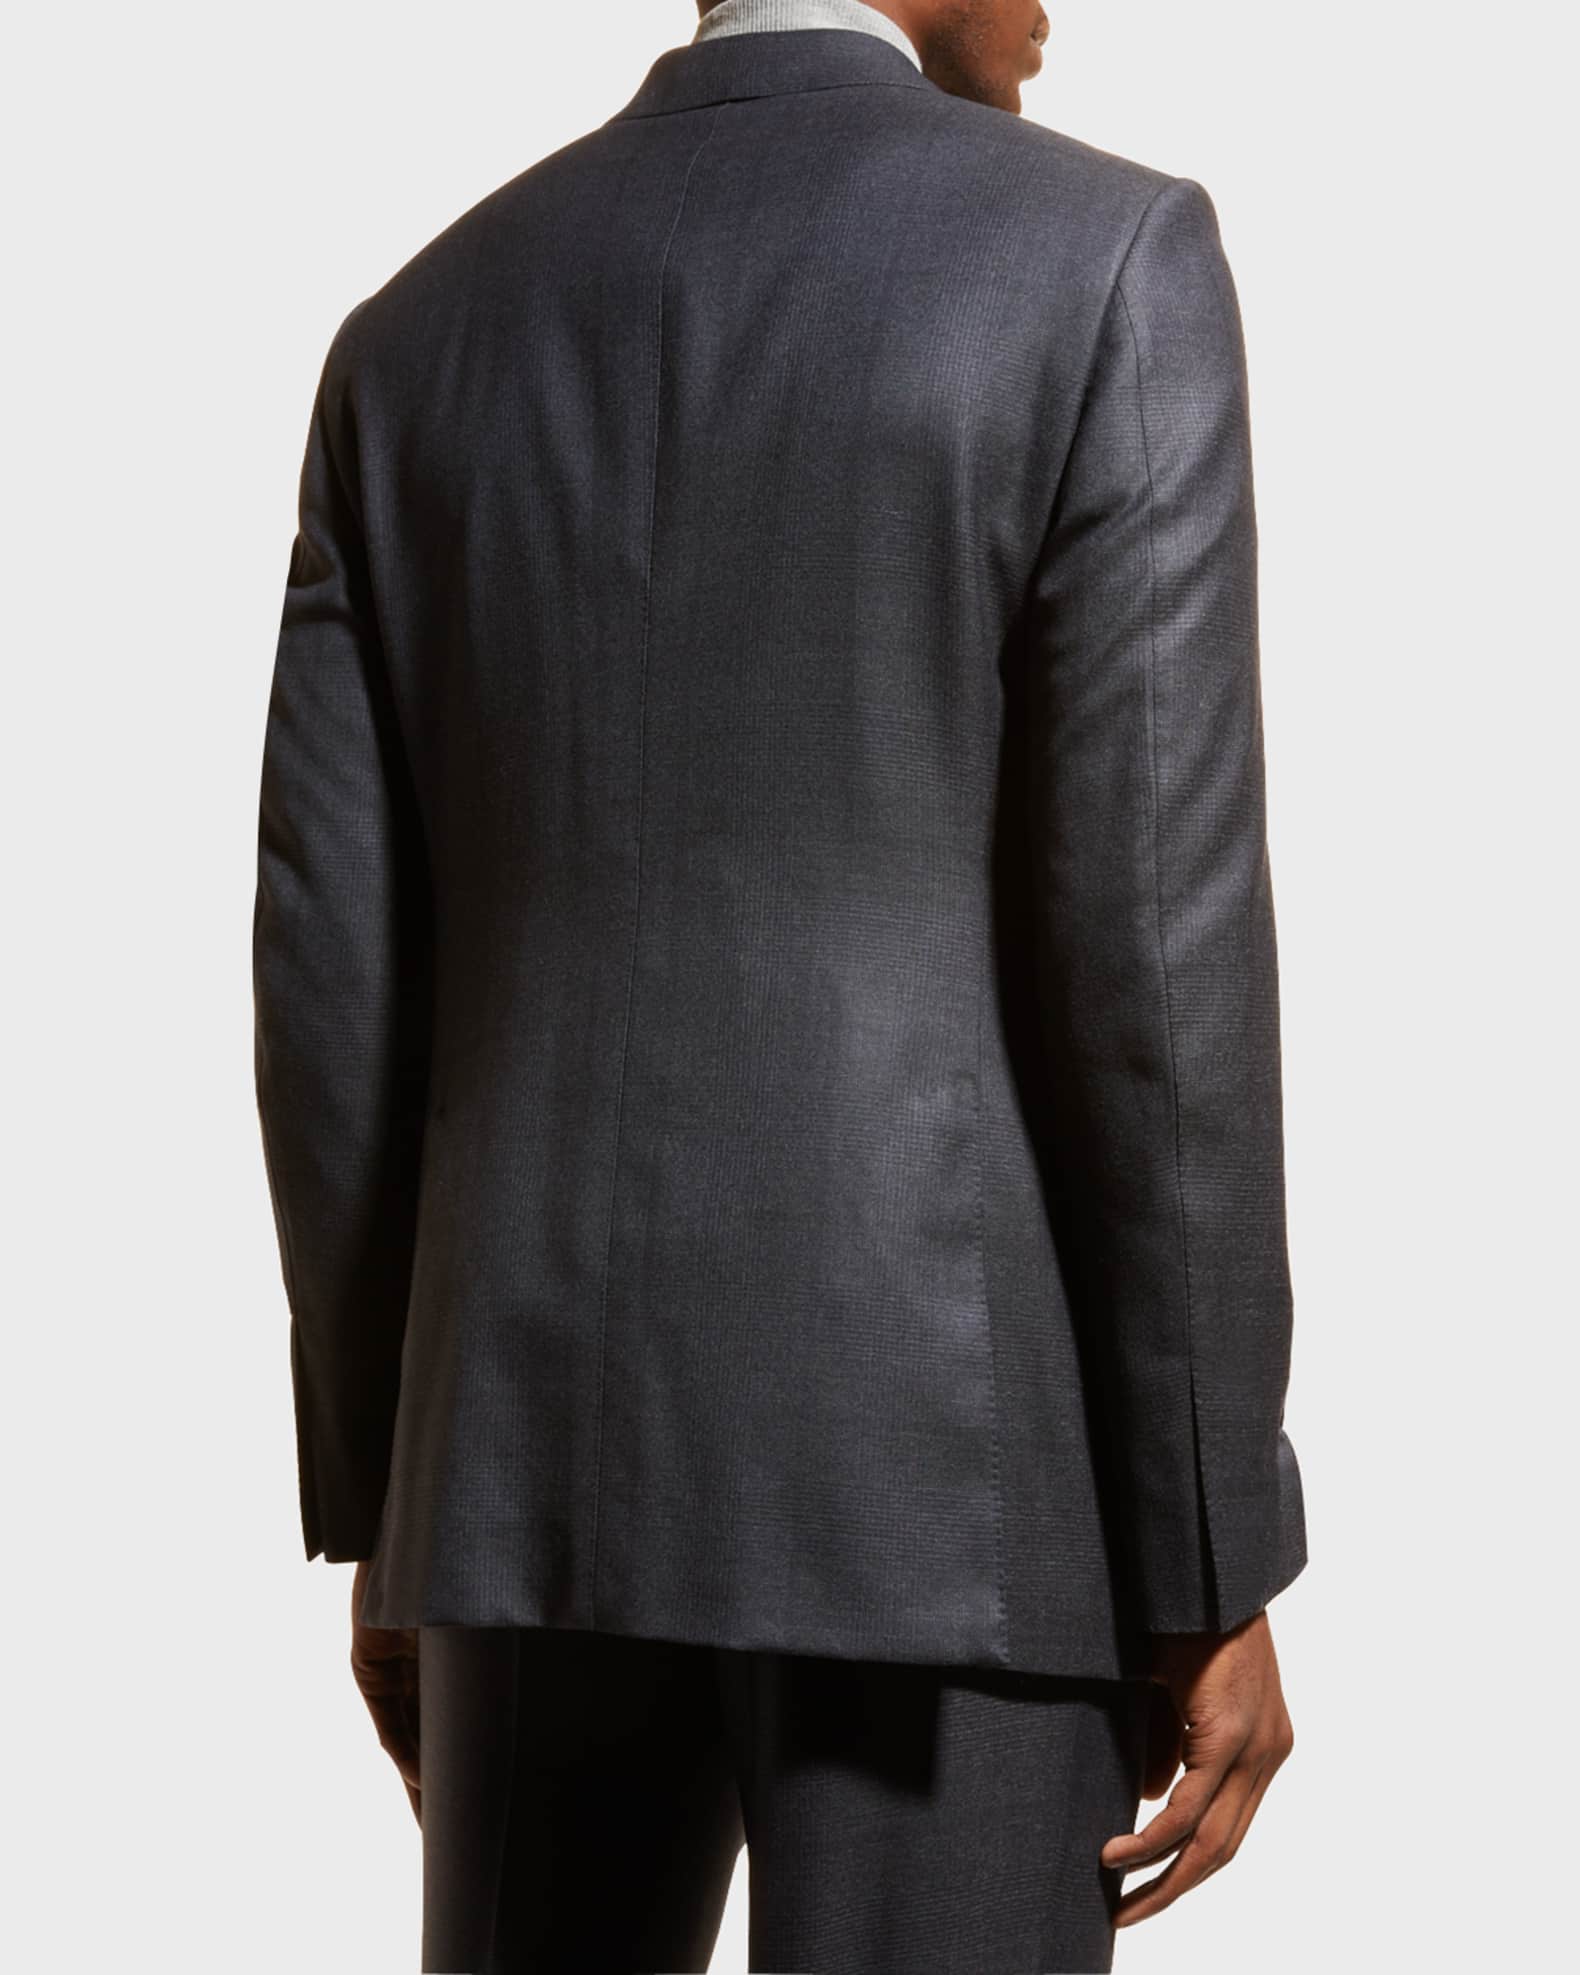 TOM FORD Men's O'Connor Prince of Wales Suit | Neiman Marcus